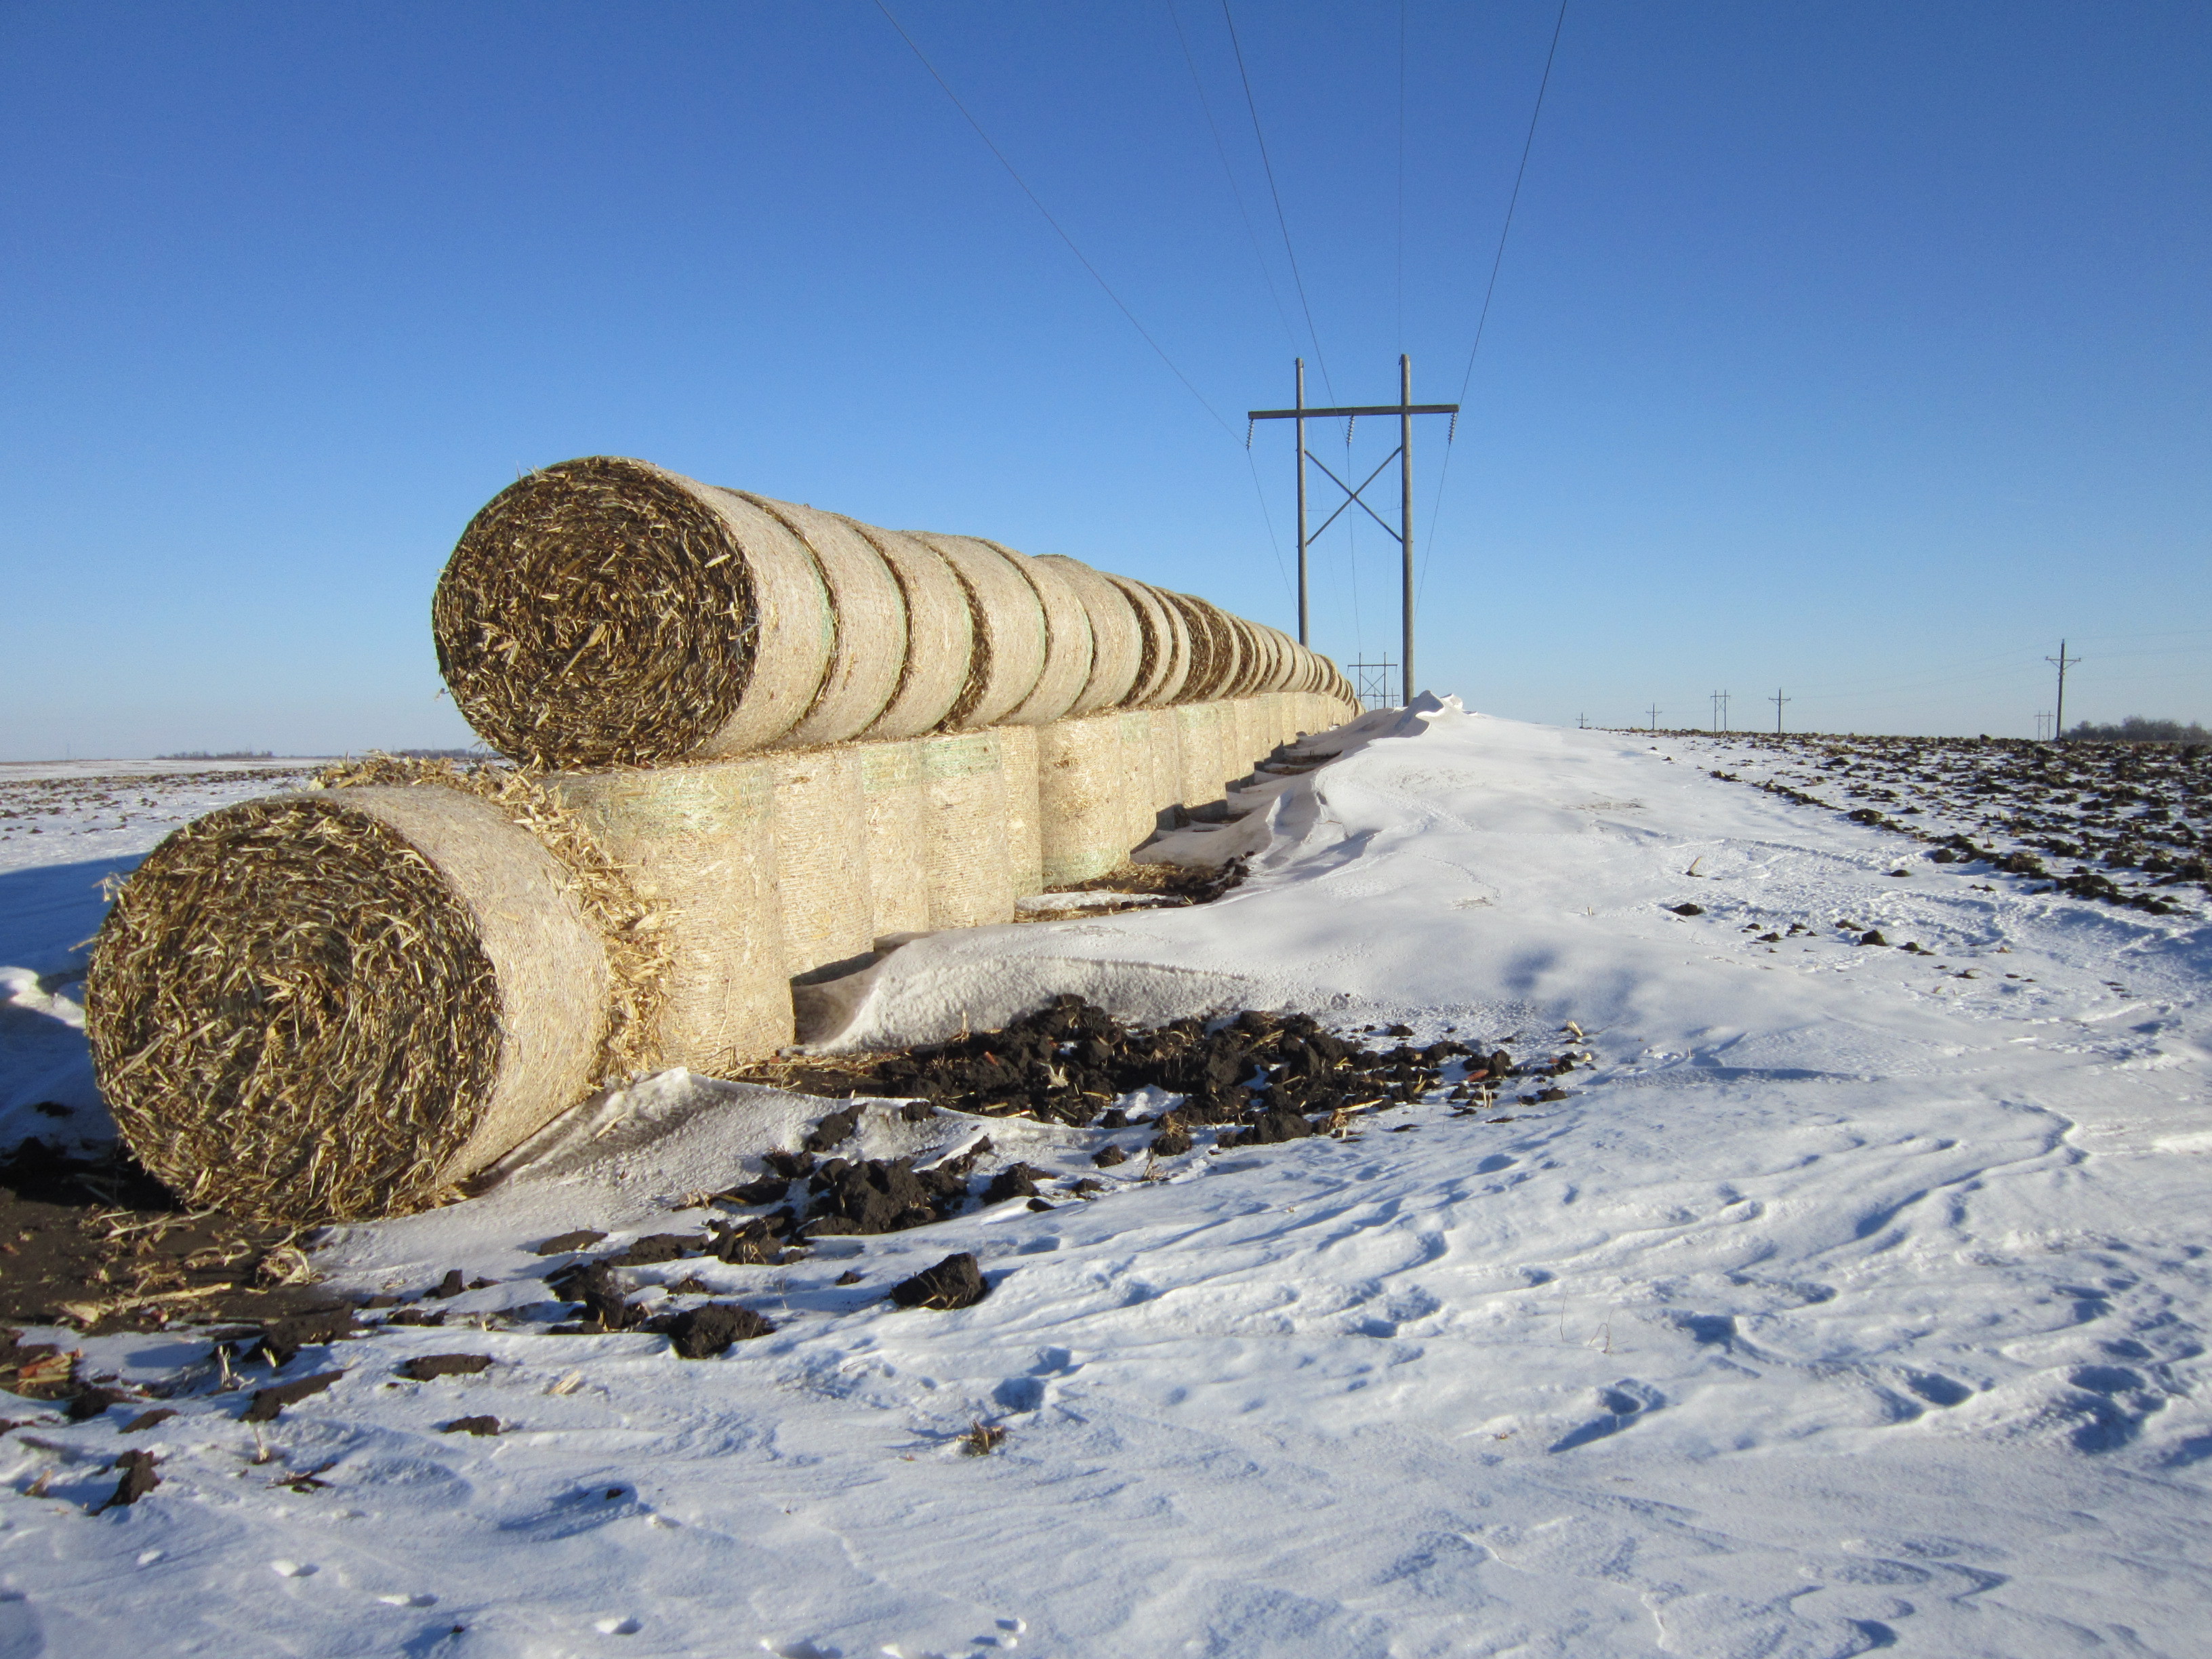 Stacked hay bales make effective snow fences for trapping blowing and drifting snow before it reaches a roadway corridor. The bales can be used for agricultural purposes once winter has passed.